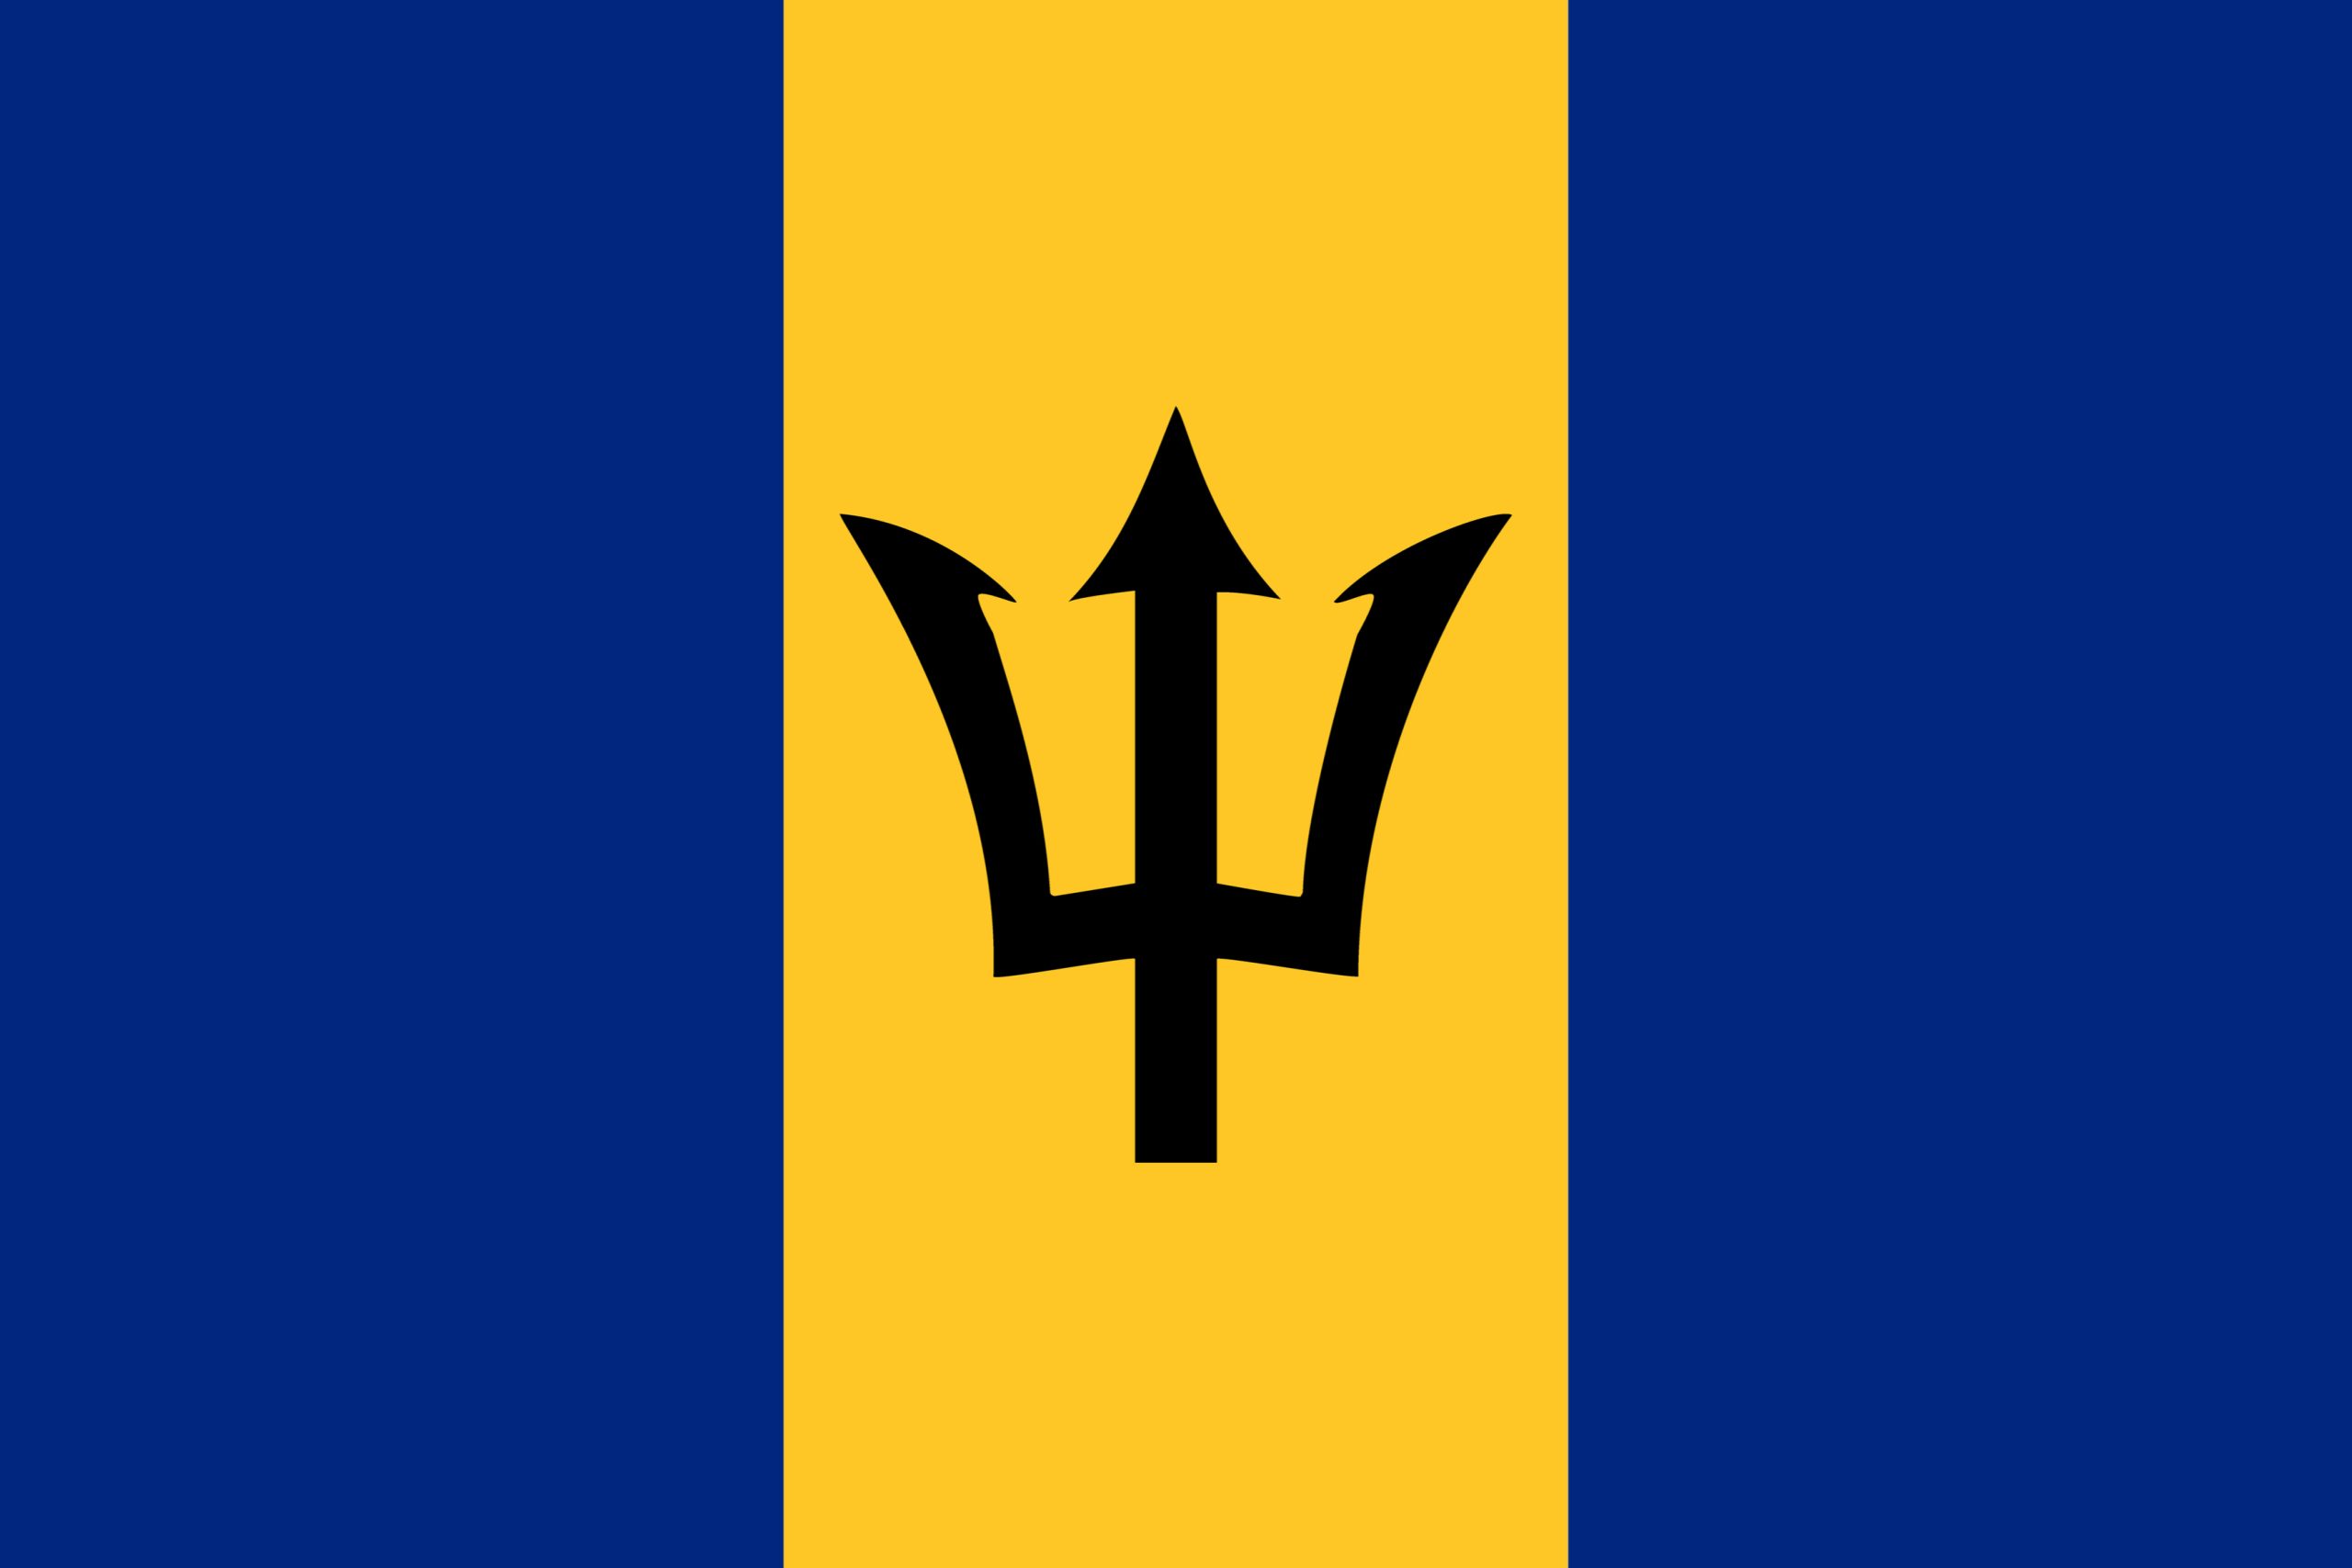 Barbados Visa Medical
• Fast service
• All tests completed on-site
• Competitive pricing